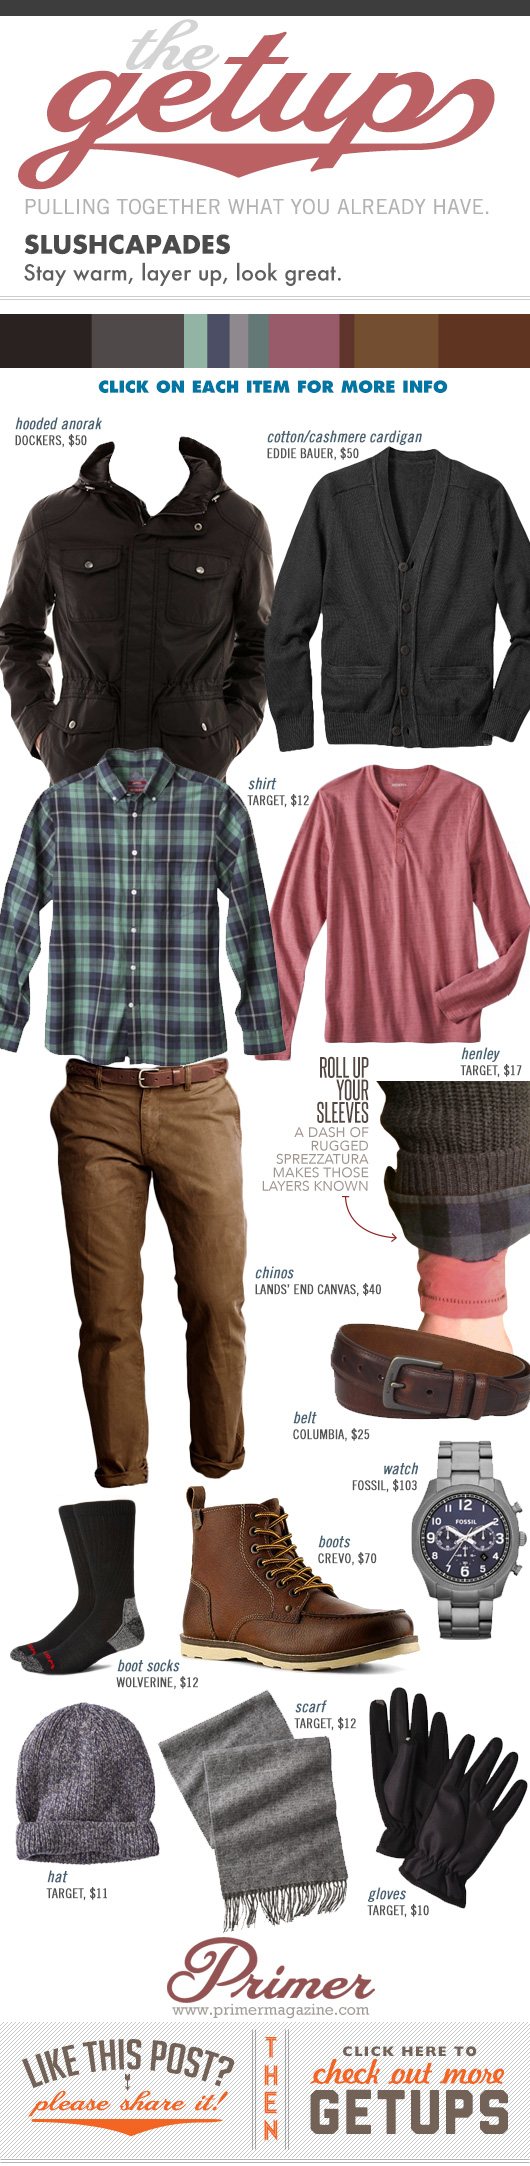 Getup Slushcapades - Winter outfit with jacket, plaid shirt, red henley, brown pants, and boots